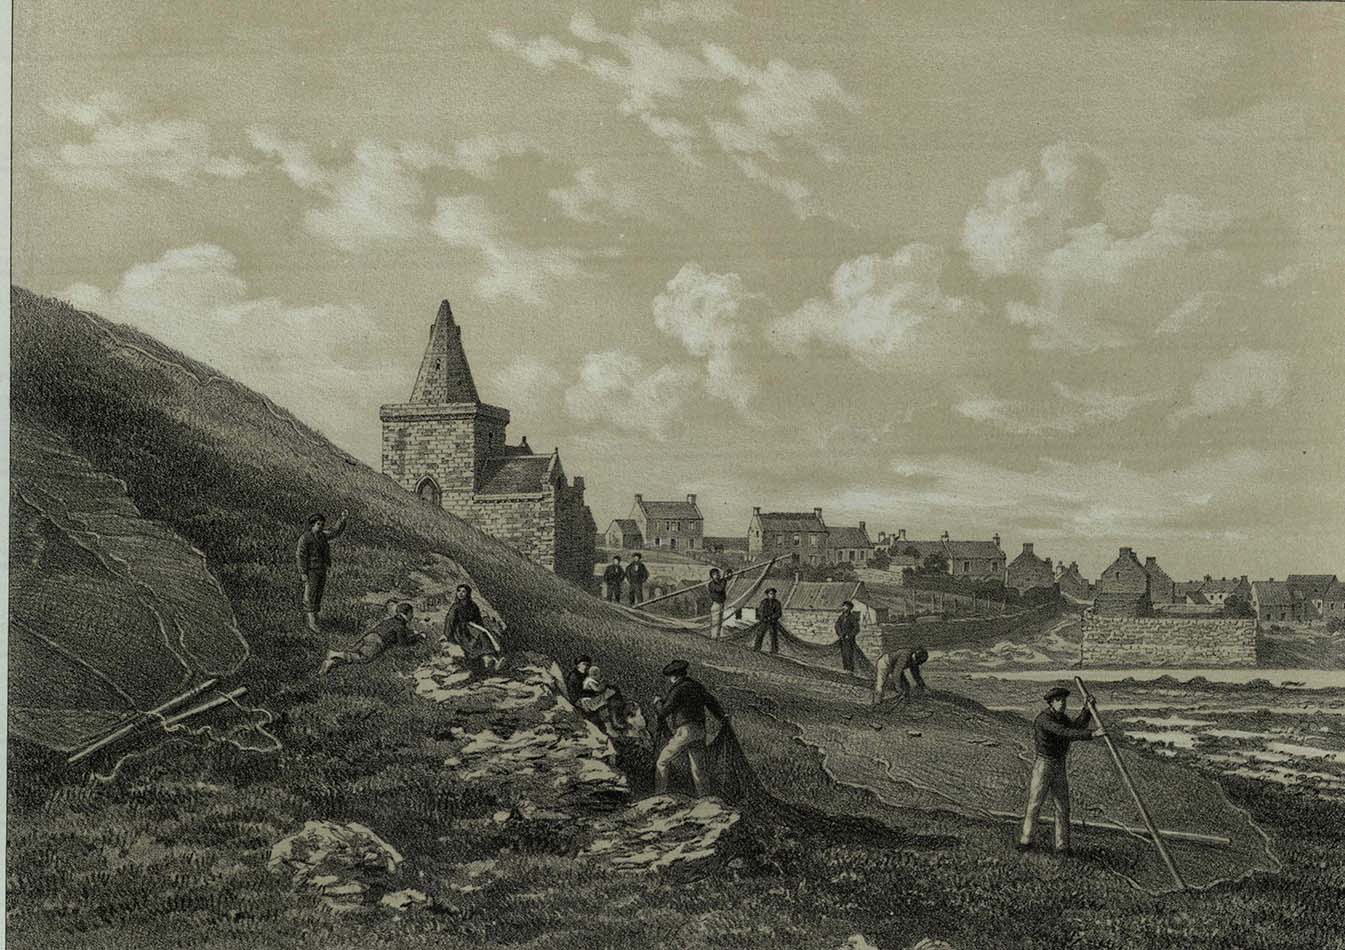 Engraving of St Monans Church from The Kingdom of Fife by Thomas Rodger, c.1860, rf DA880.F4R7